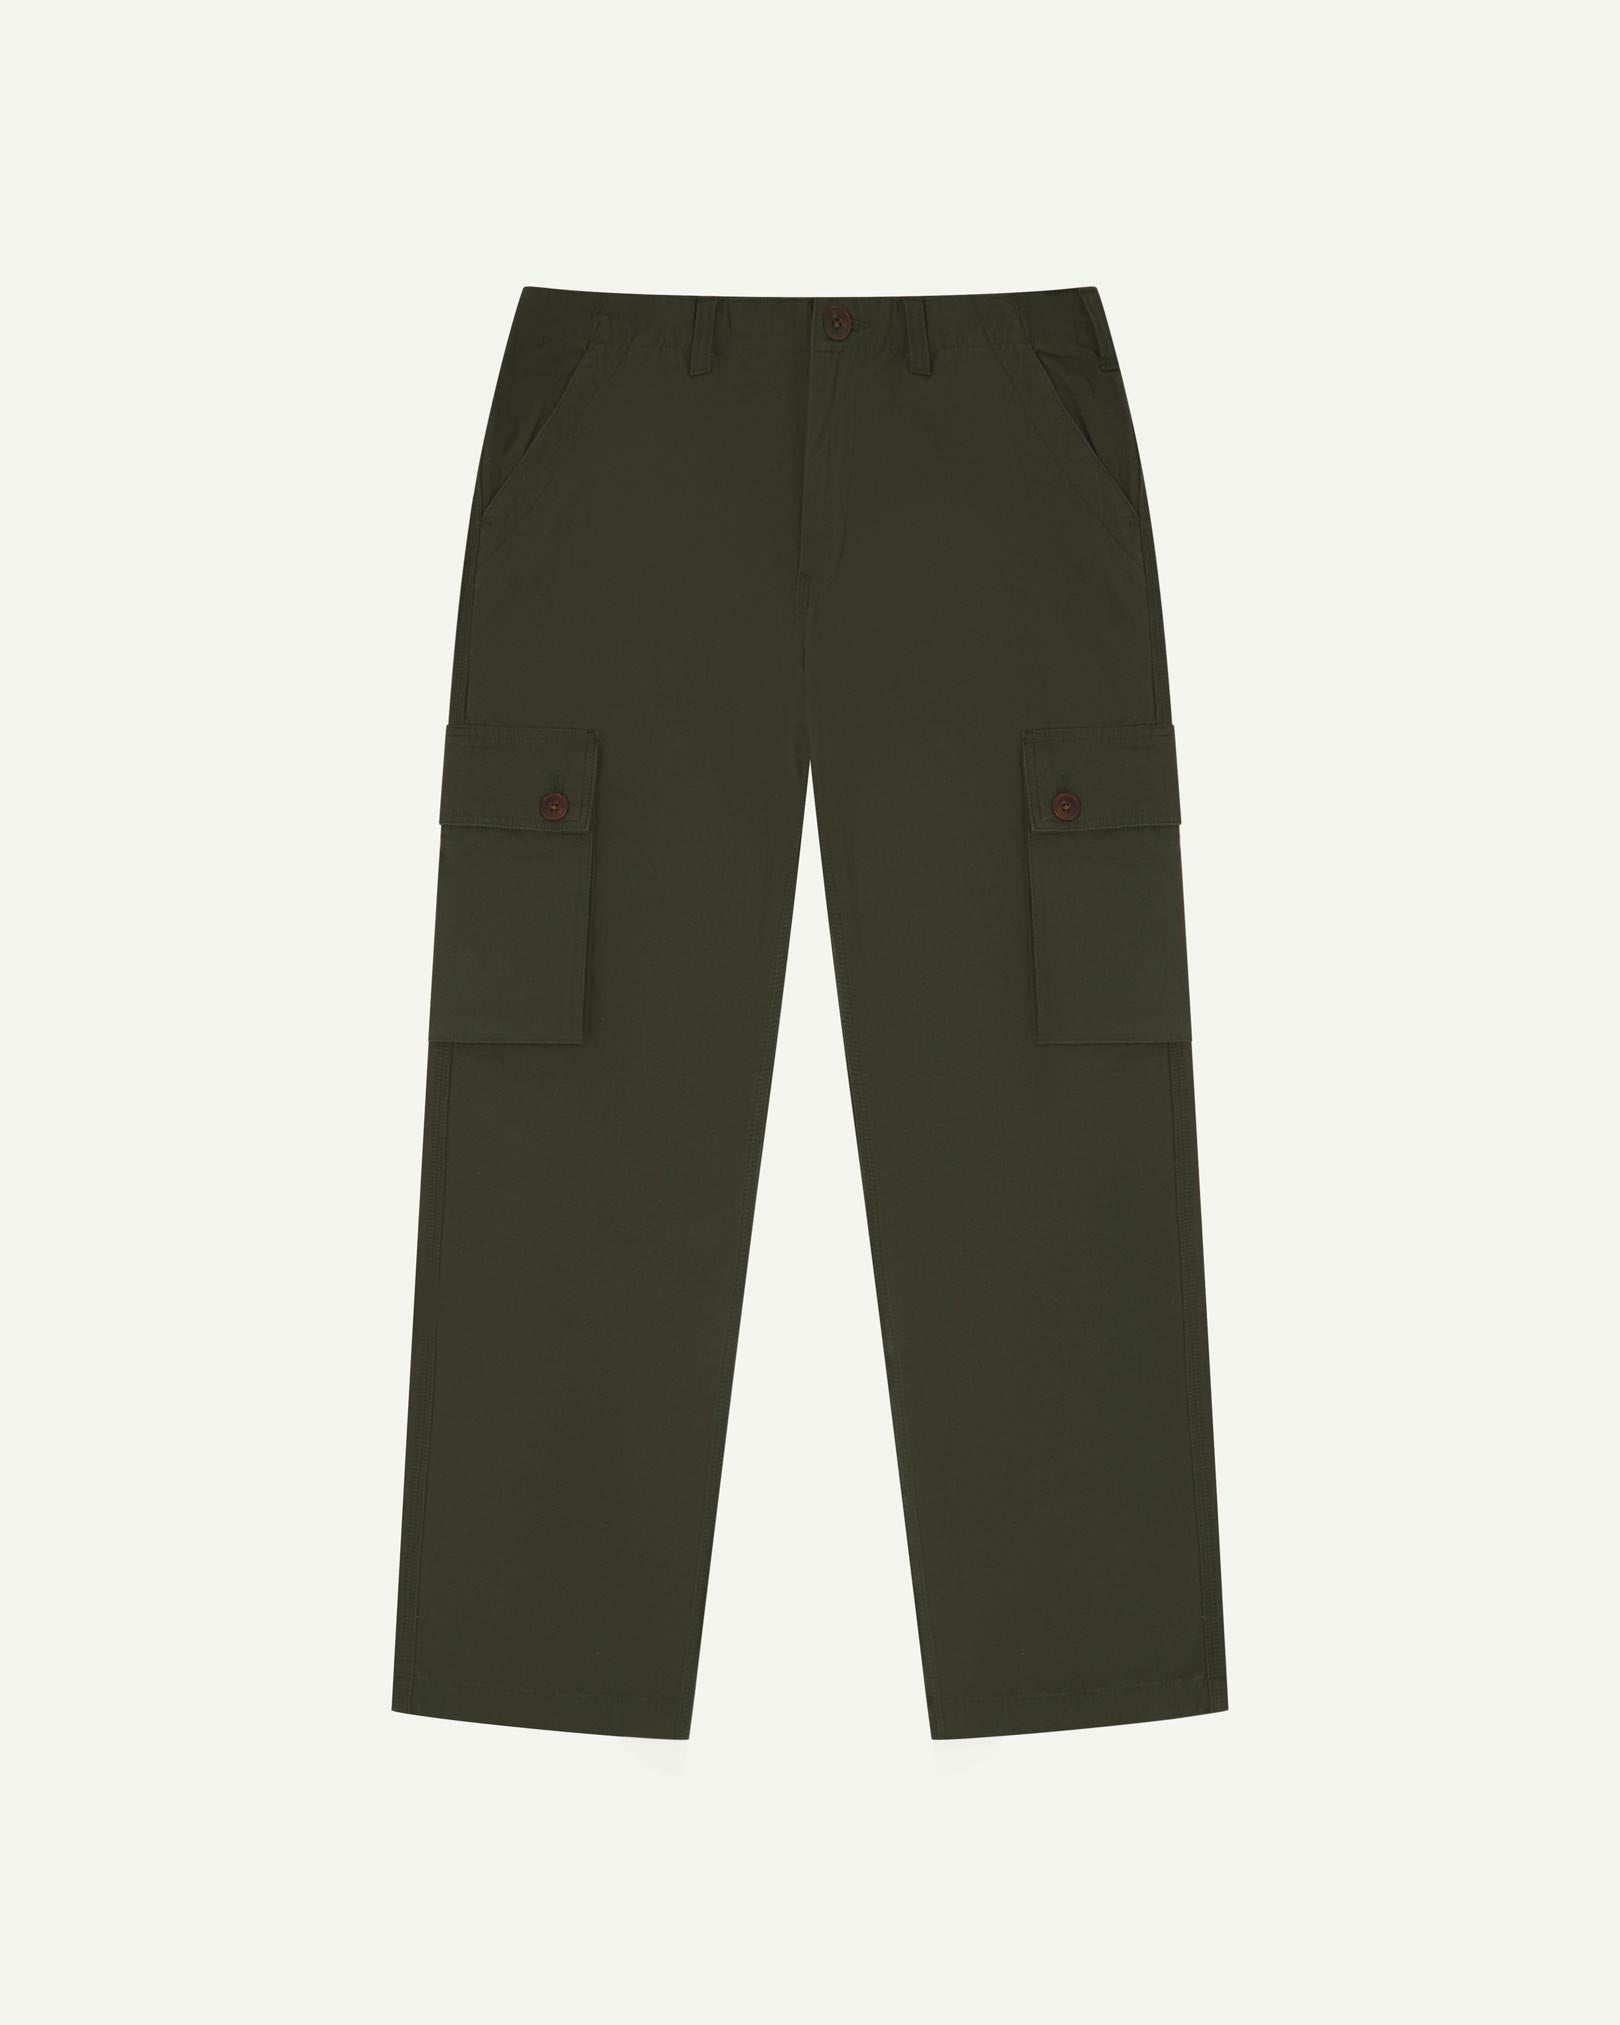 Flat front view of 5014 Uskees men's organic cotton vine green cargo trousers showing front pockets, cargo pockets and adjustable waistband